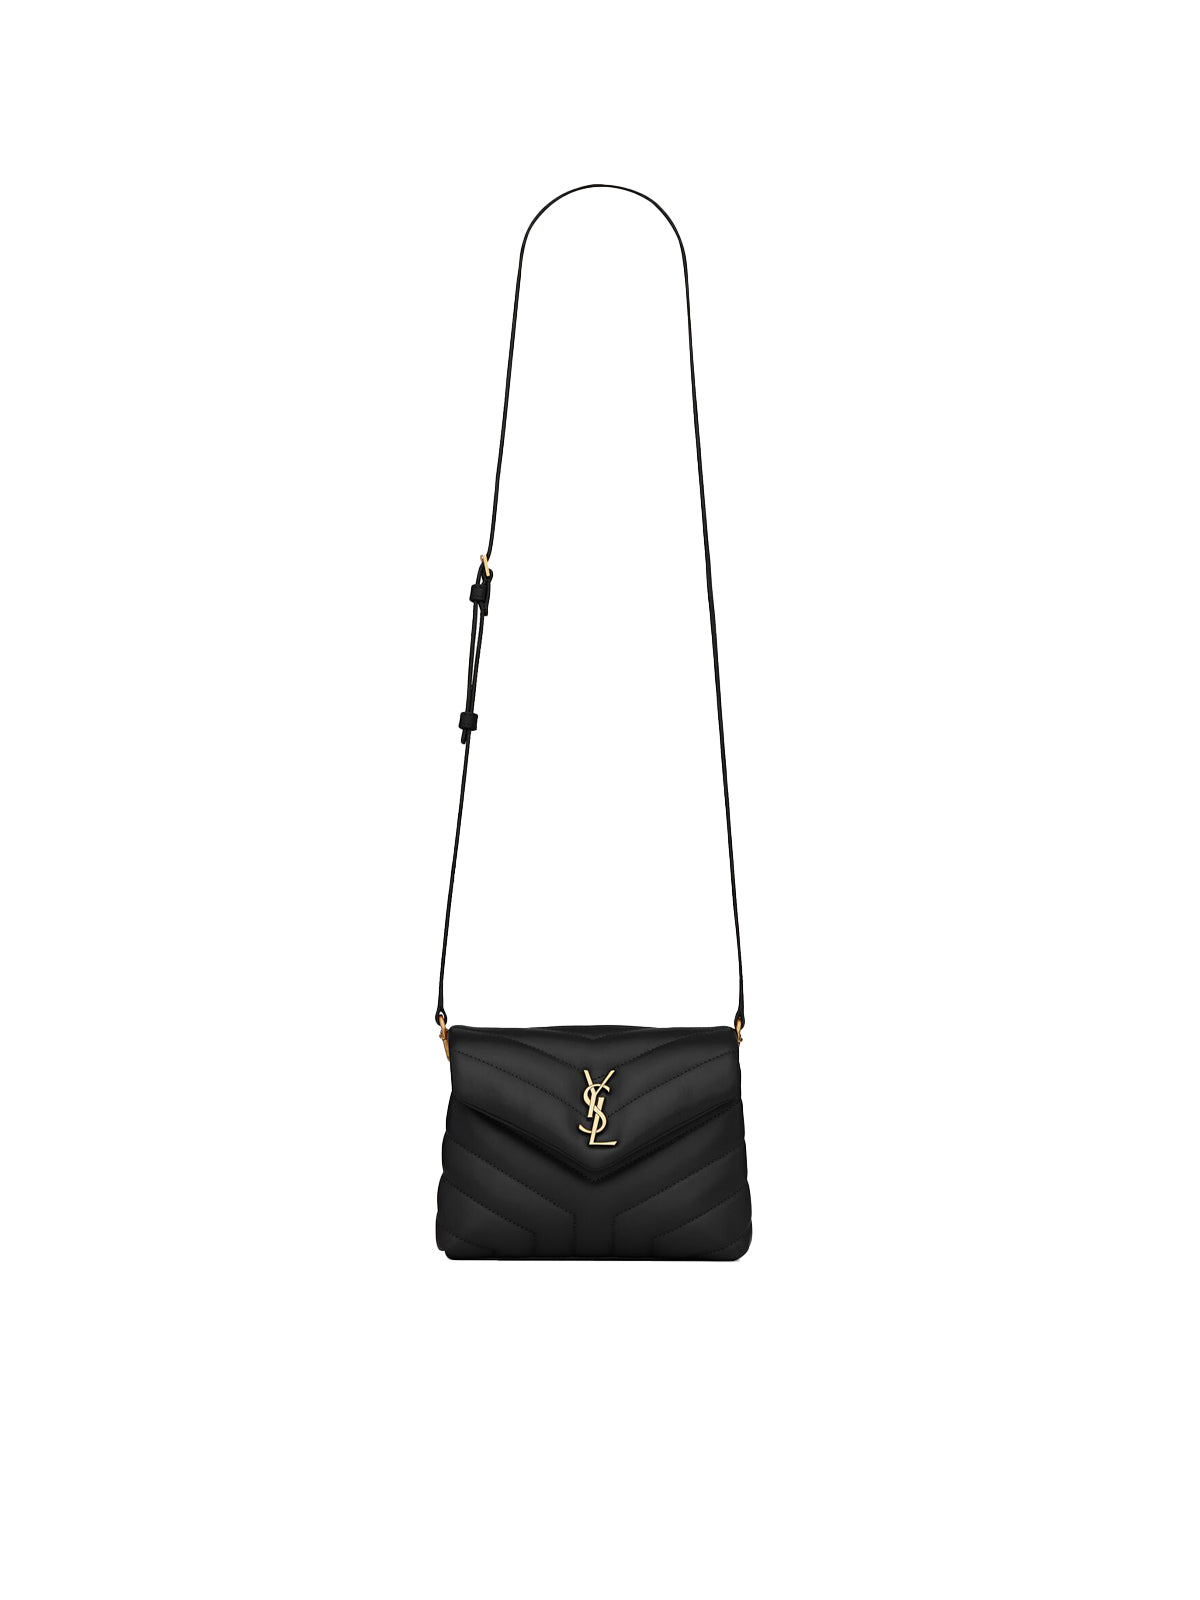 LOULOU TOY BAG IN "Y" QUILTED LEATHER